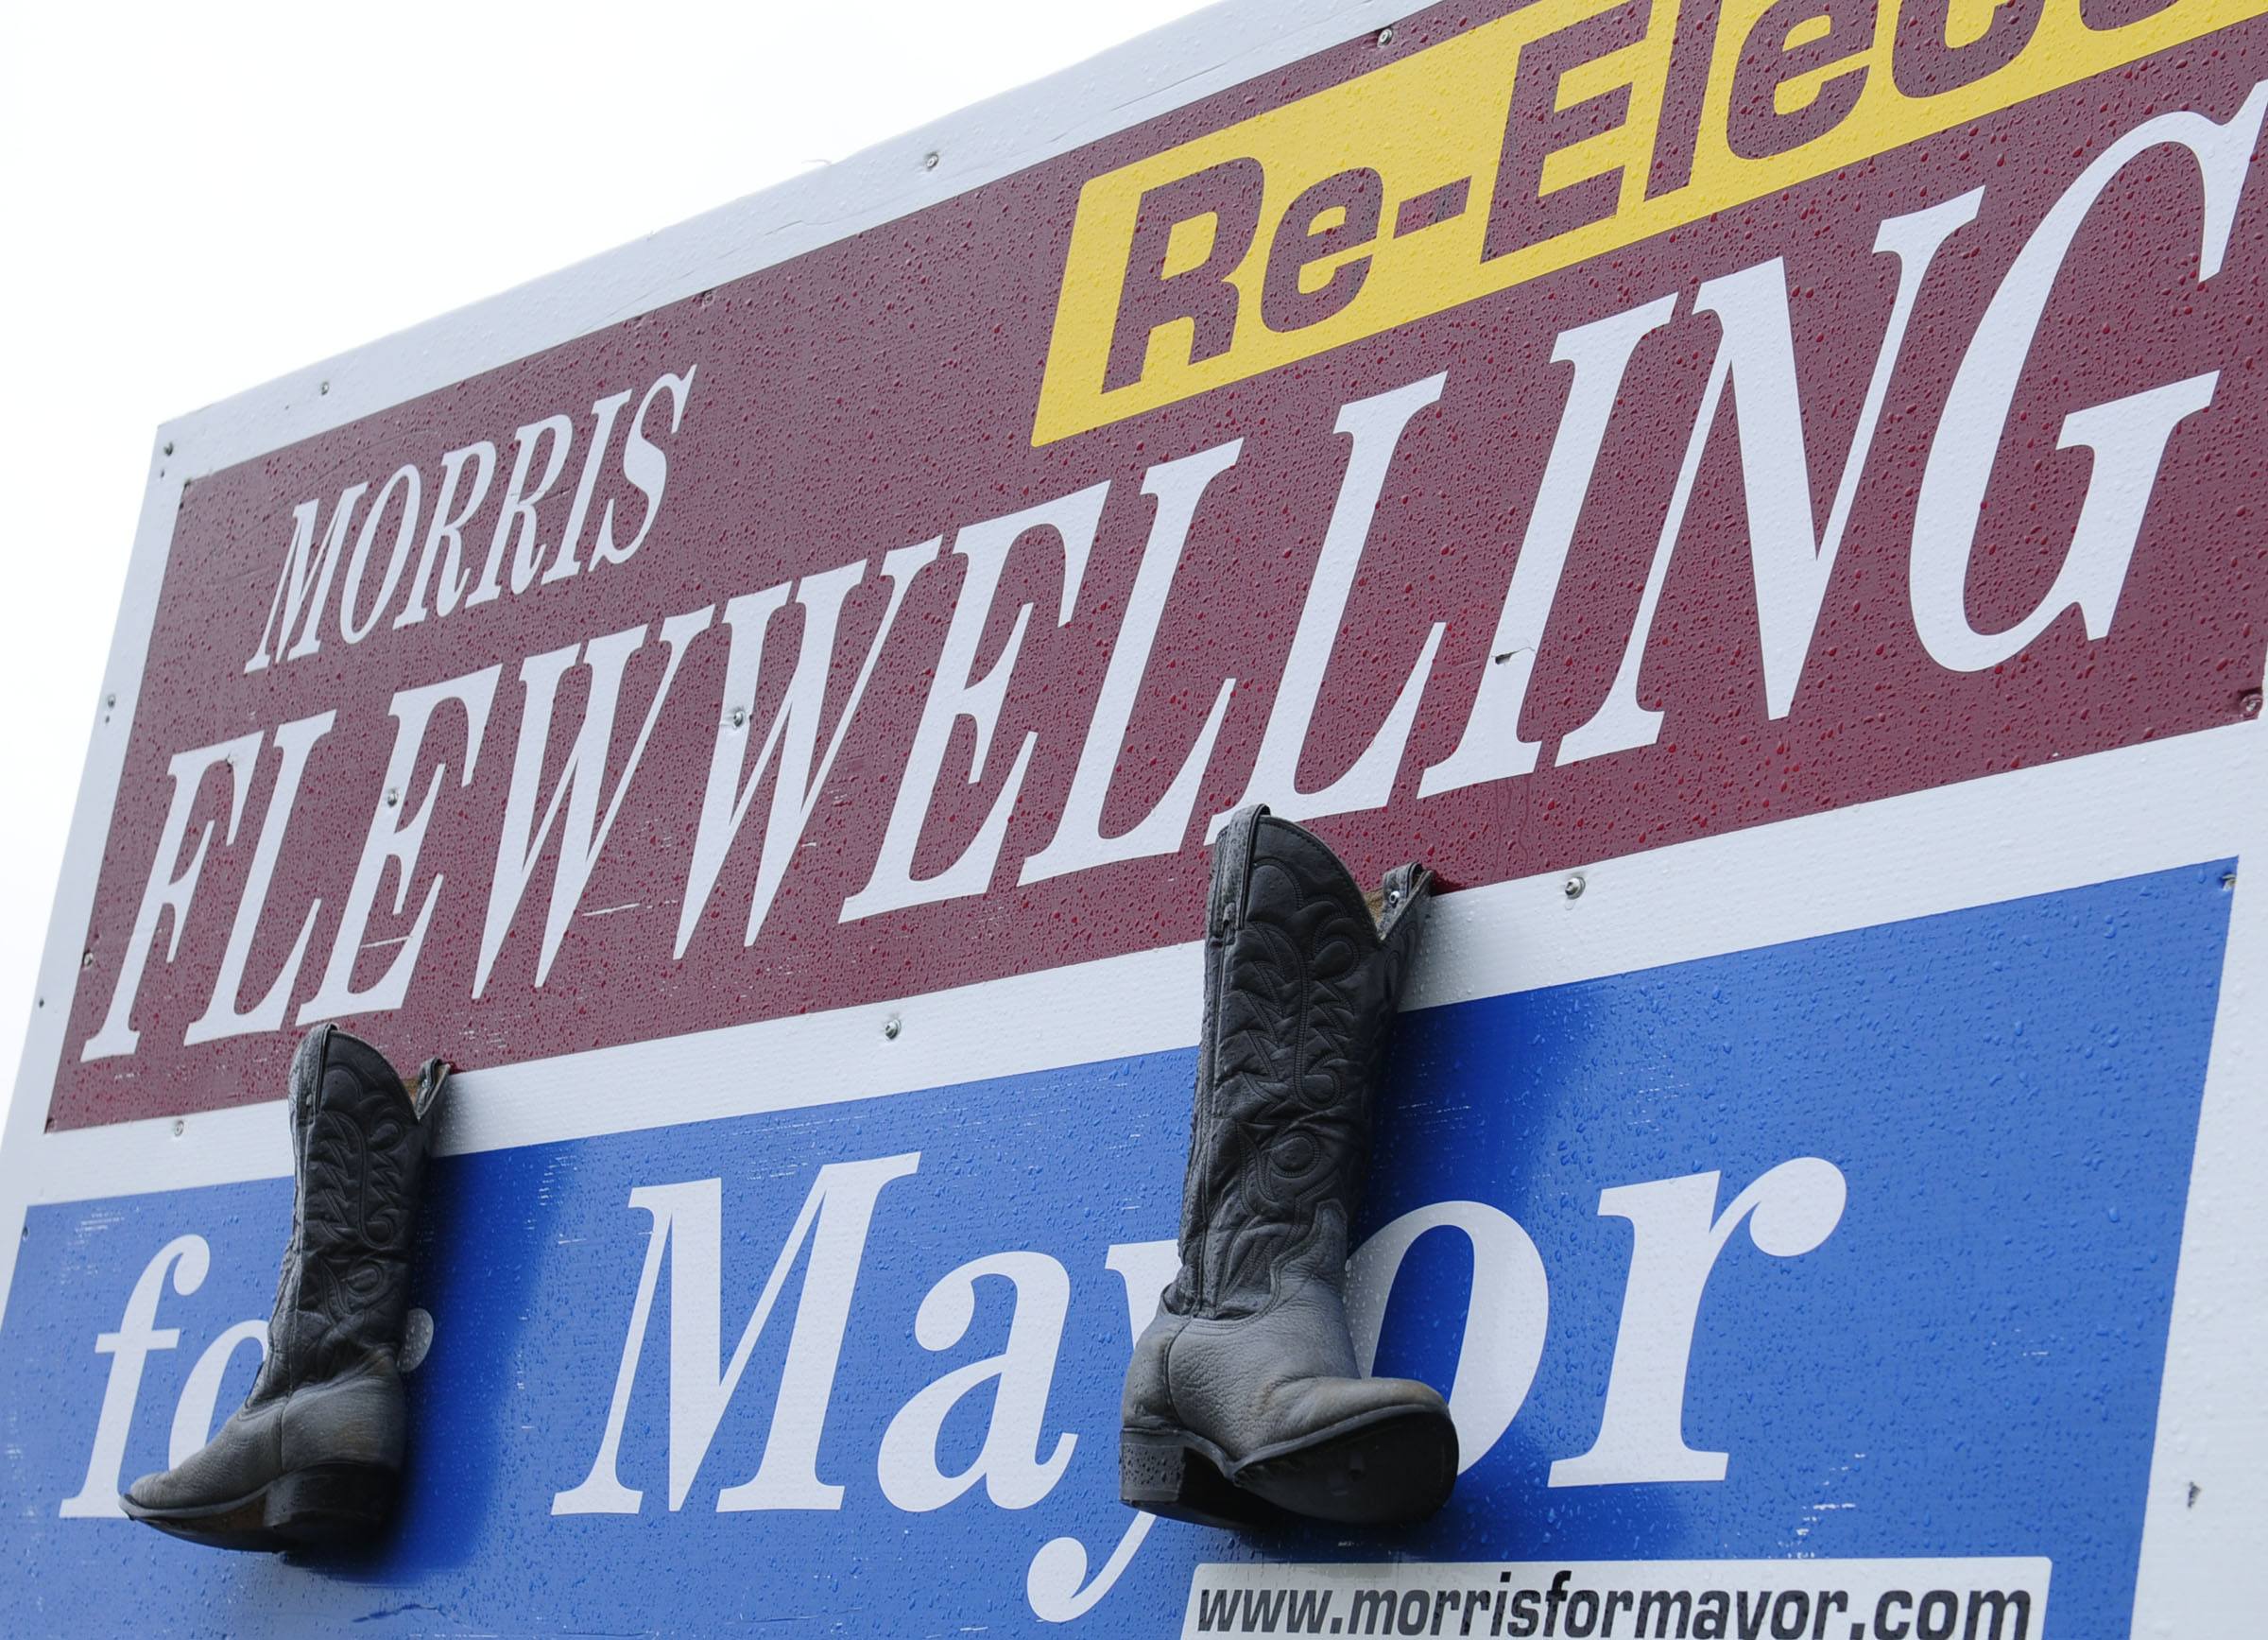 A pair of old cowboy boots were hung on a campaign sign of Morris Flewwelling on Taylor Drive in Red Deer recently as a practical joke during the upcoming election.